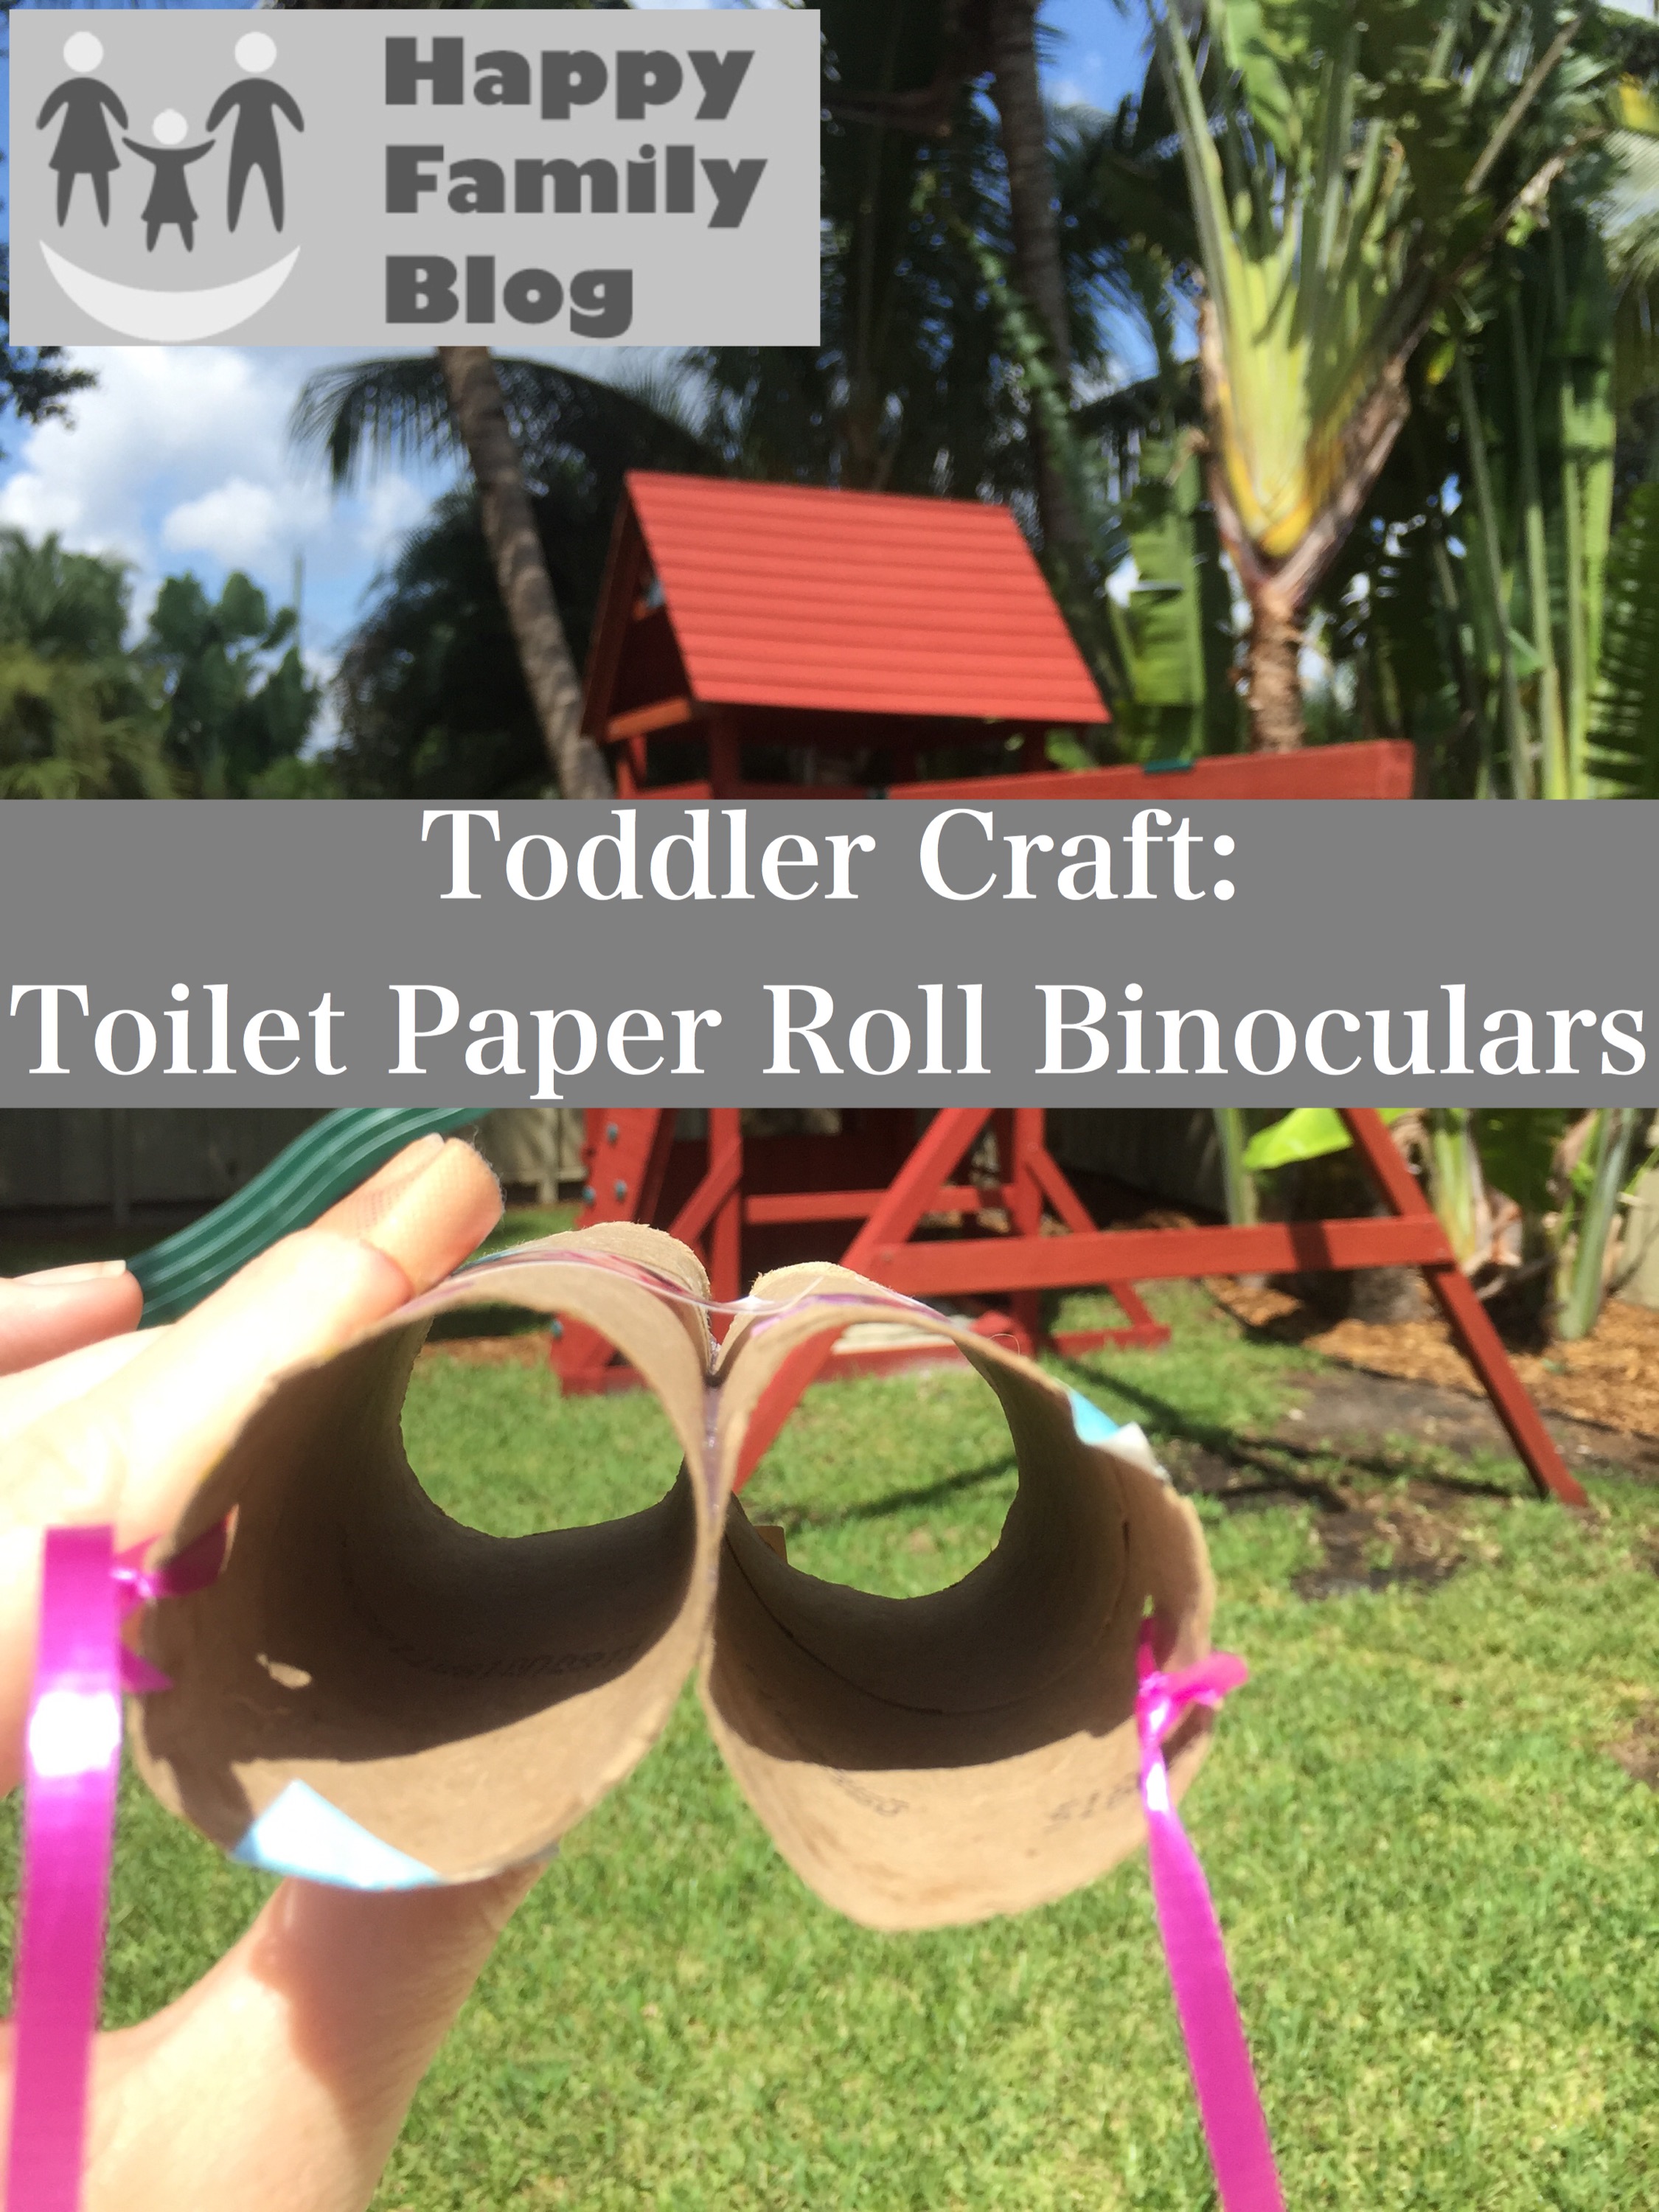 Toddler Crafts: Toilet Paper Binoculars by Happy Family Blog